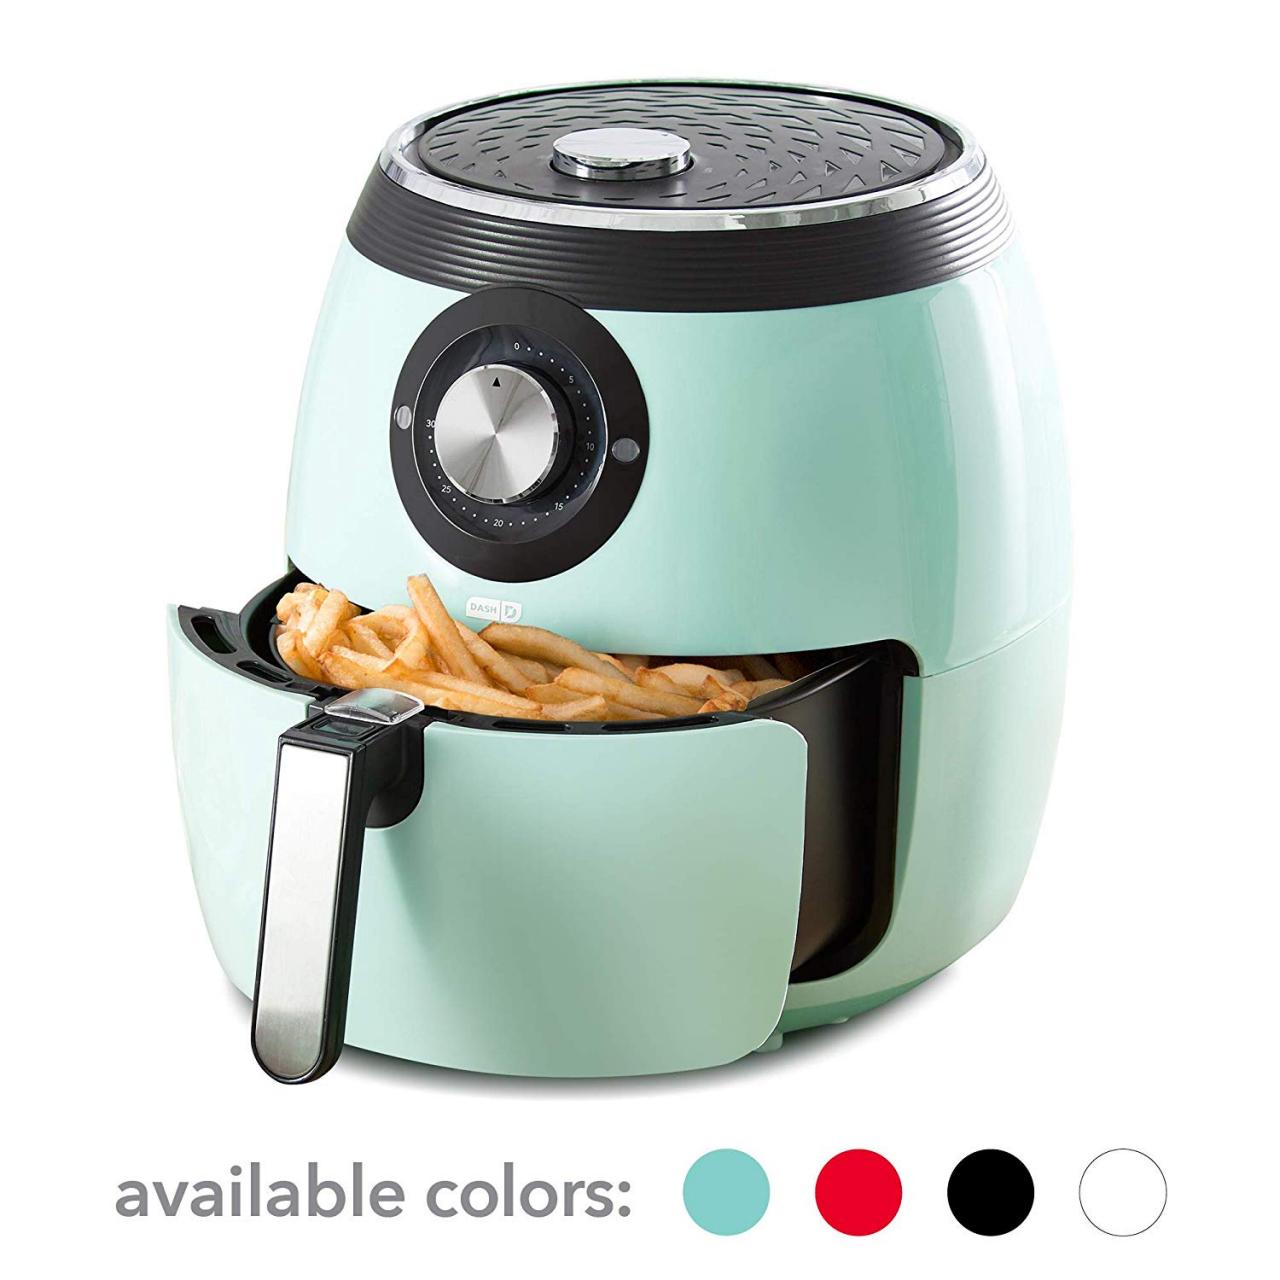 https://food.fnr.sndimg.com/content/dam/images/food/products/2019/5/10/rx_dash-deluxe-electric-air-fryer--oven-cooker.jpeg.rend.hgtvcom.1280.1280.suffix/1557502942577.jpeg